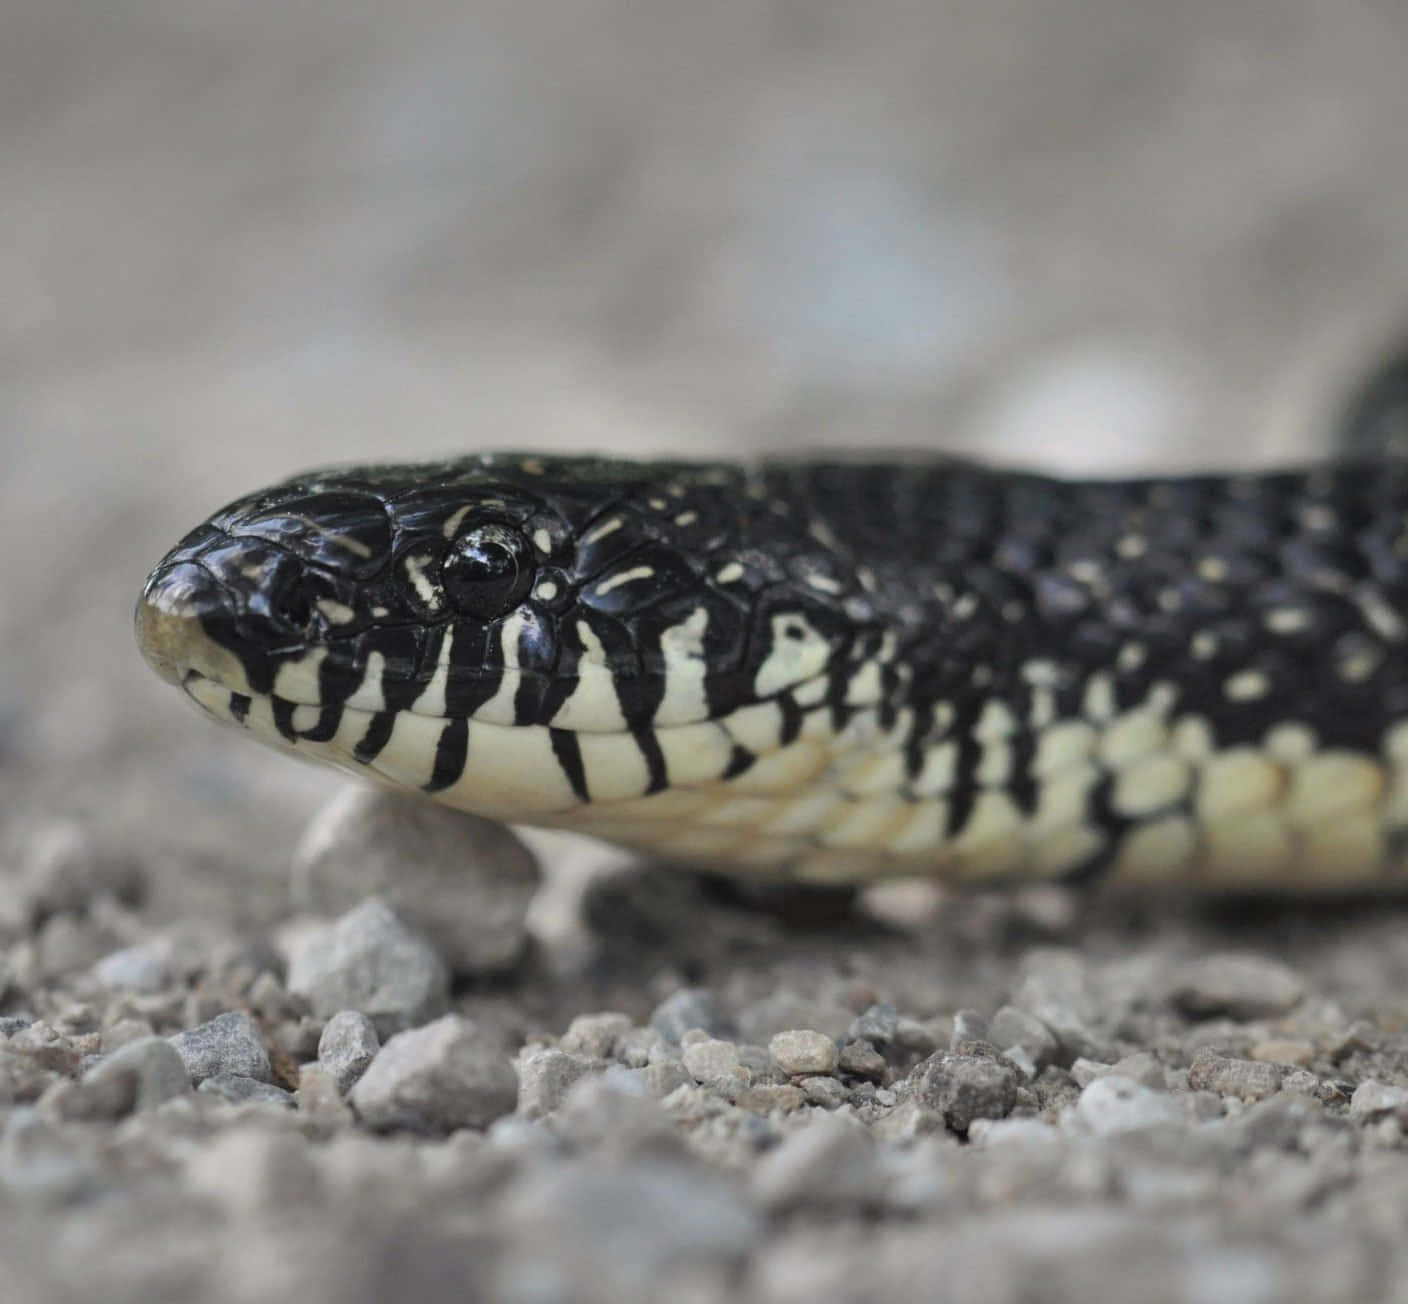 A Black And White Snake Is Laying On The Ground